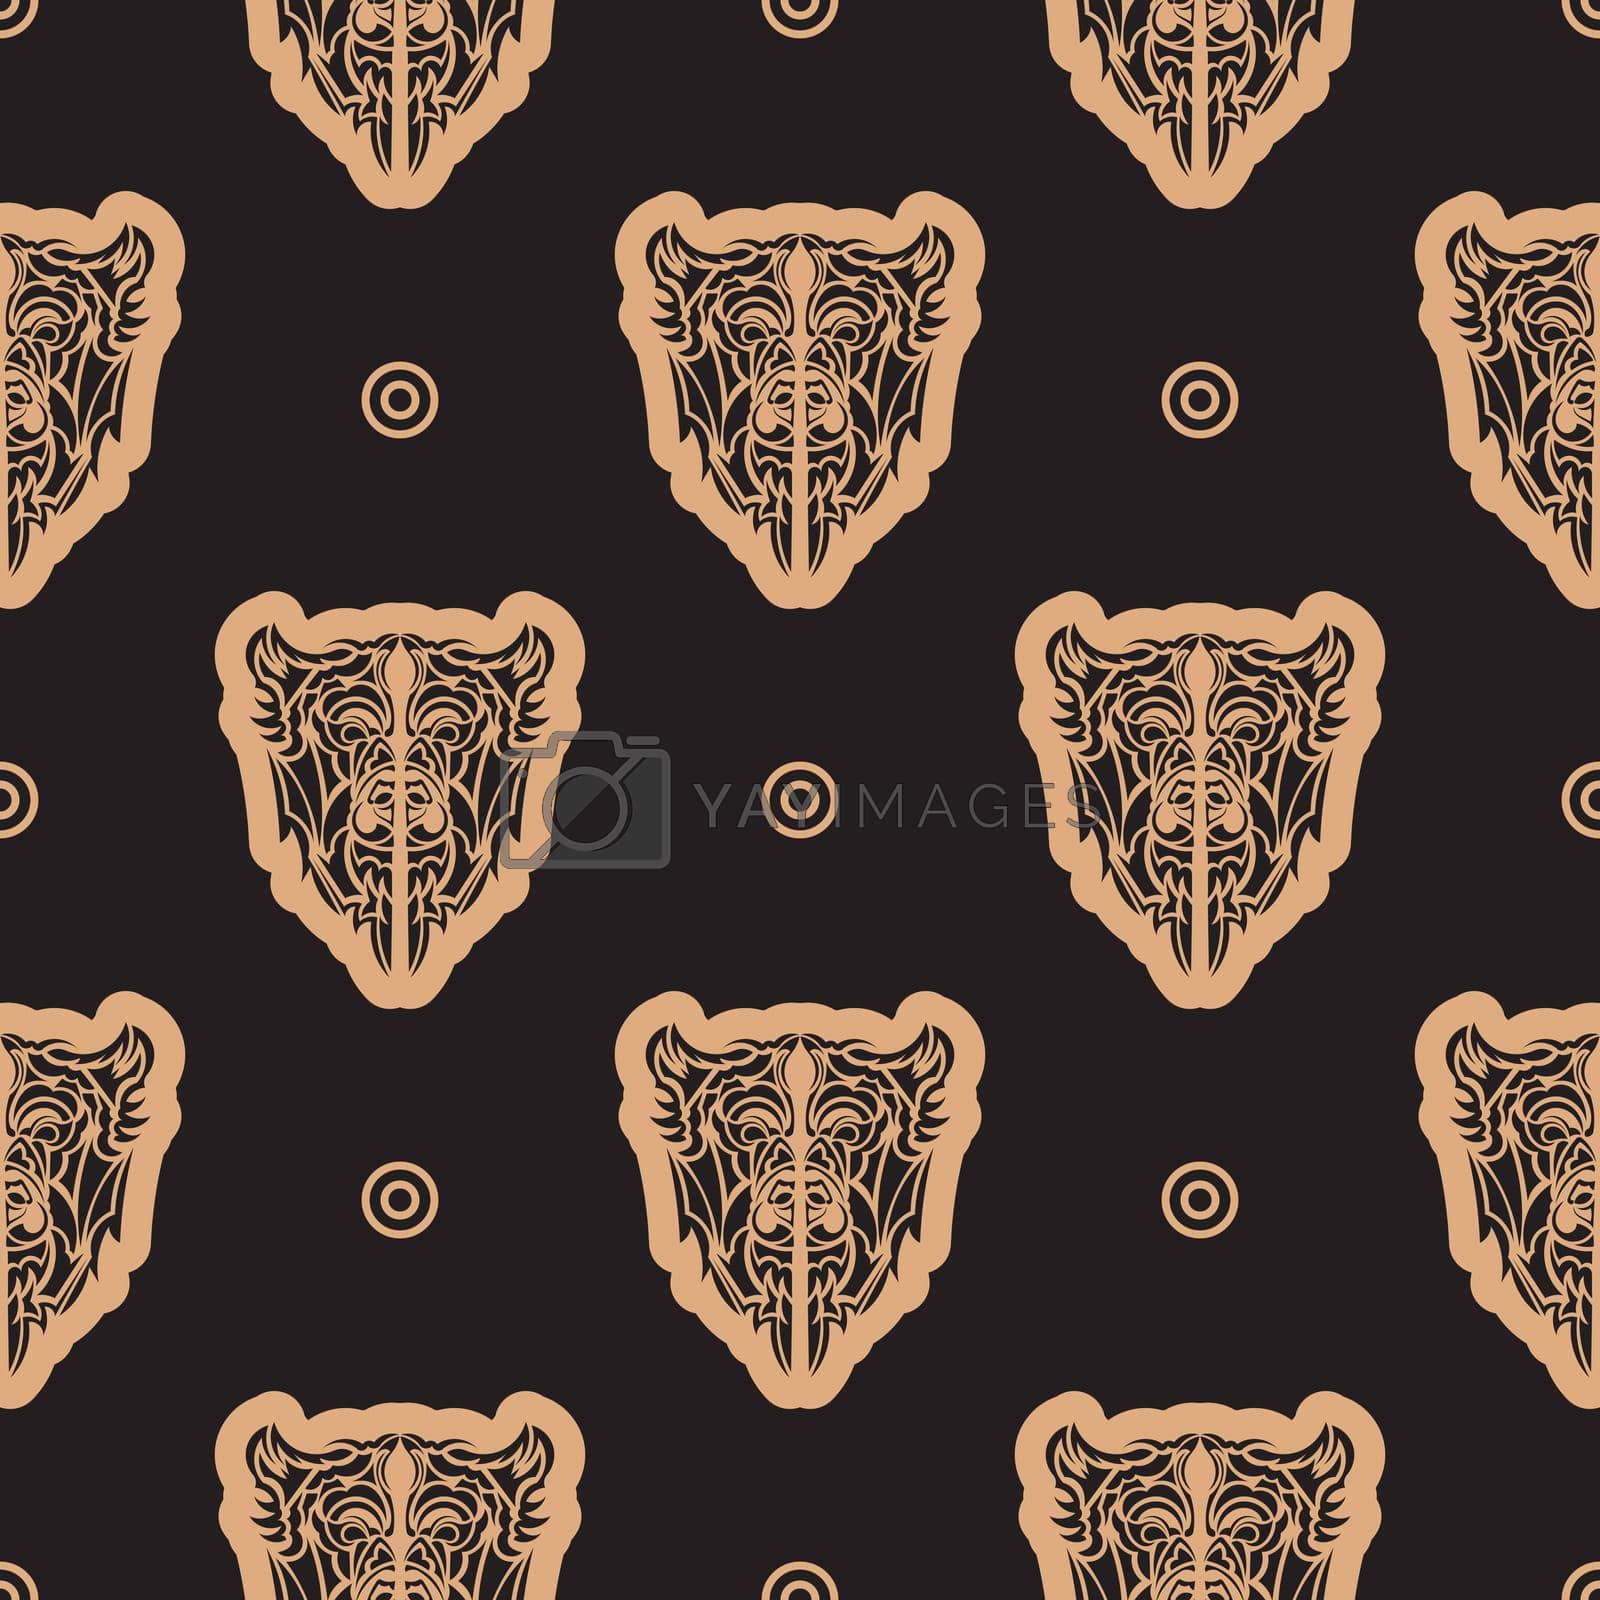 Seamless pattern with a dog's face in simple style. Good for garments, textiles, backgrounds and prints. Vector illustration.